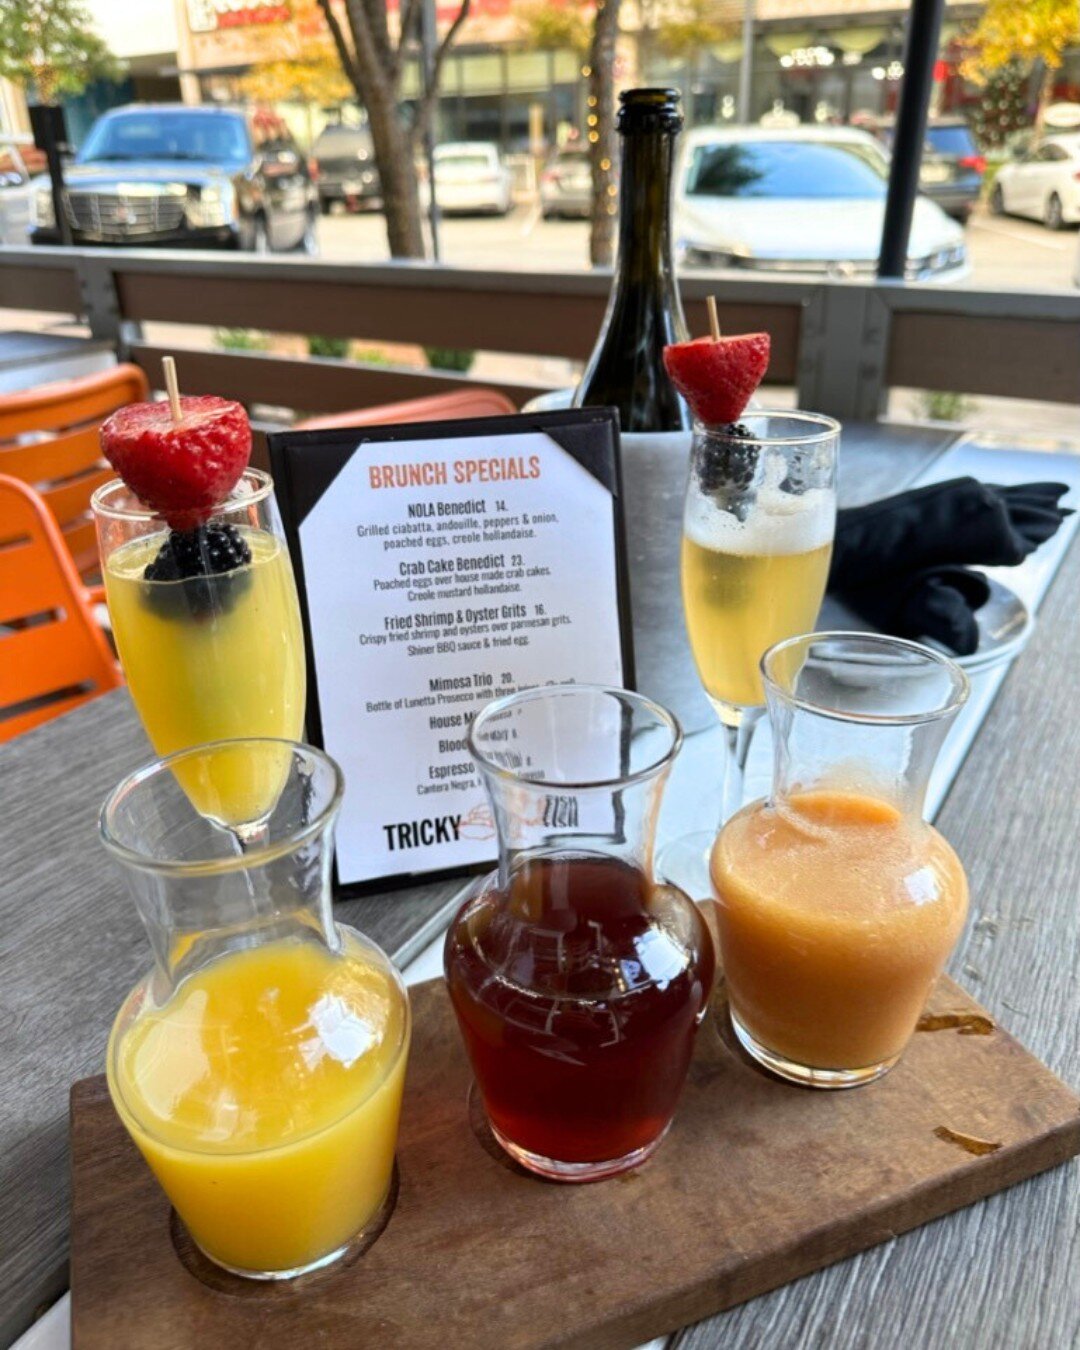 Meet your new main squeeze: The Mimosa Trio! 🍾🍊⁠
⁠
For just $20, enjoy a bottle of Lunetta Prosecco, freshly squeezed OJ, and two other rotating juices. ⁠
⁠
Every Saturday and Sunday from 11 AM - 2 PM. Plus our full menu&rsquo;s available, because 